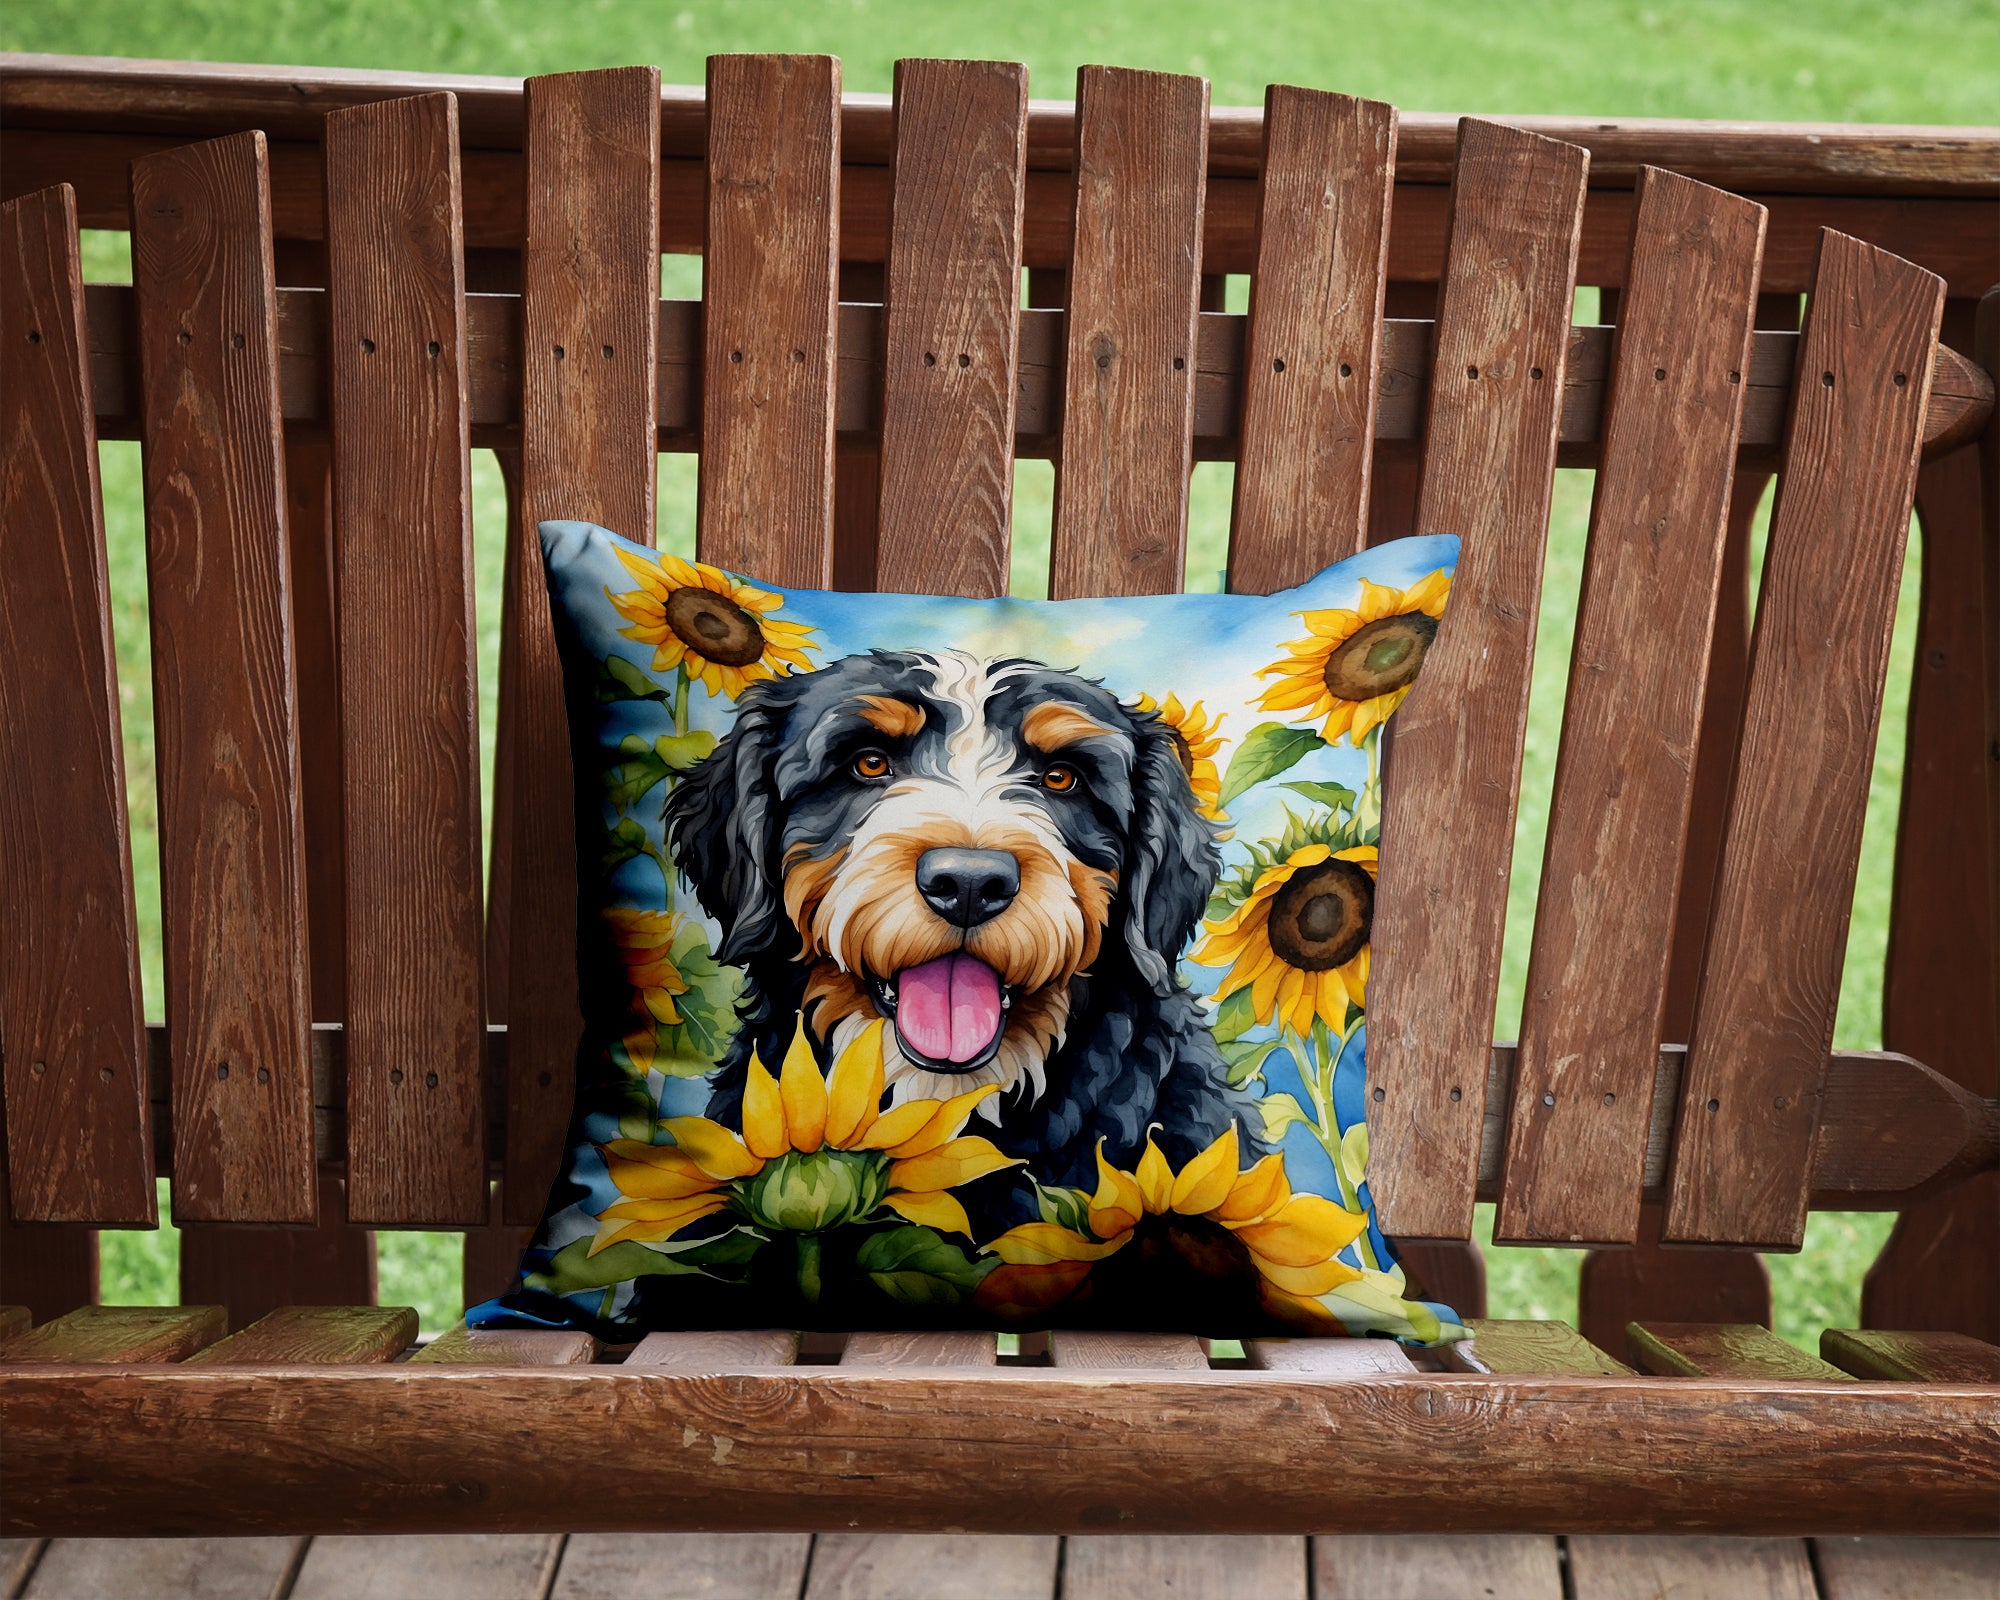 Buy this Bernedoodle in Sunflowers Throw Pillow